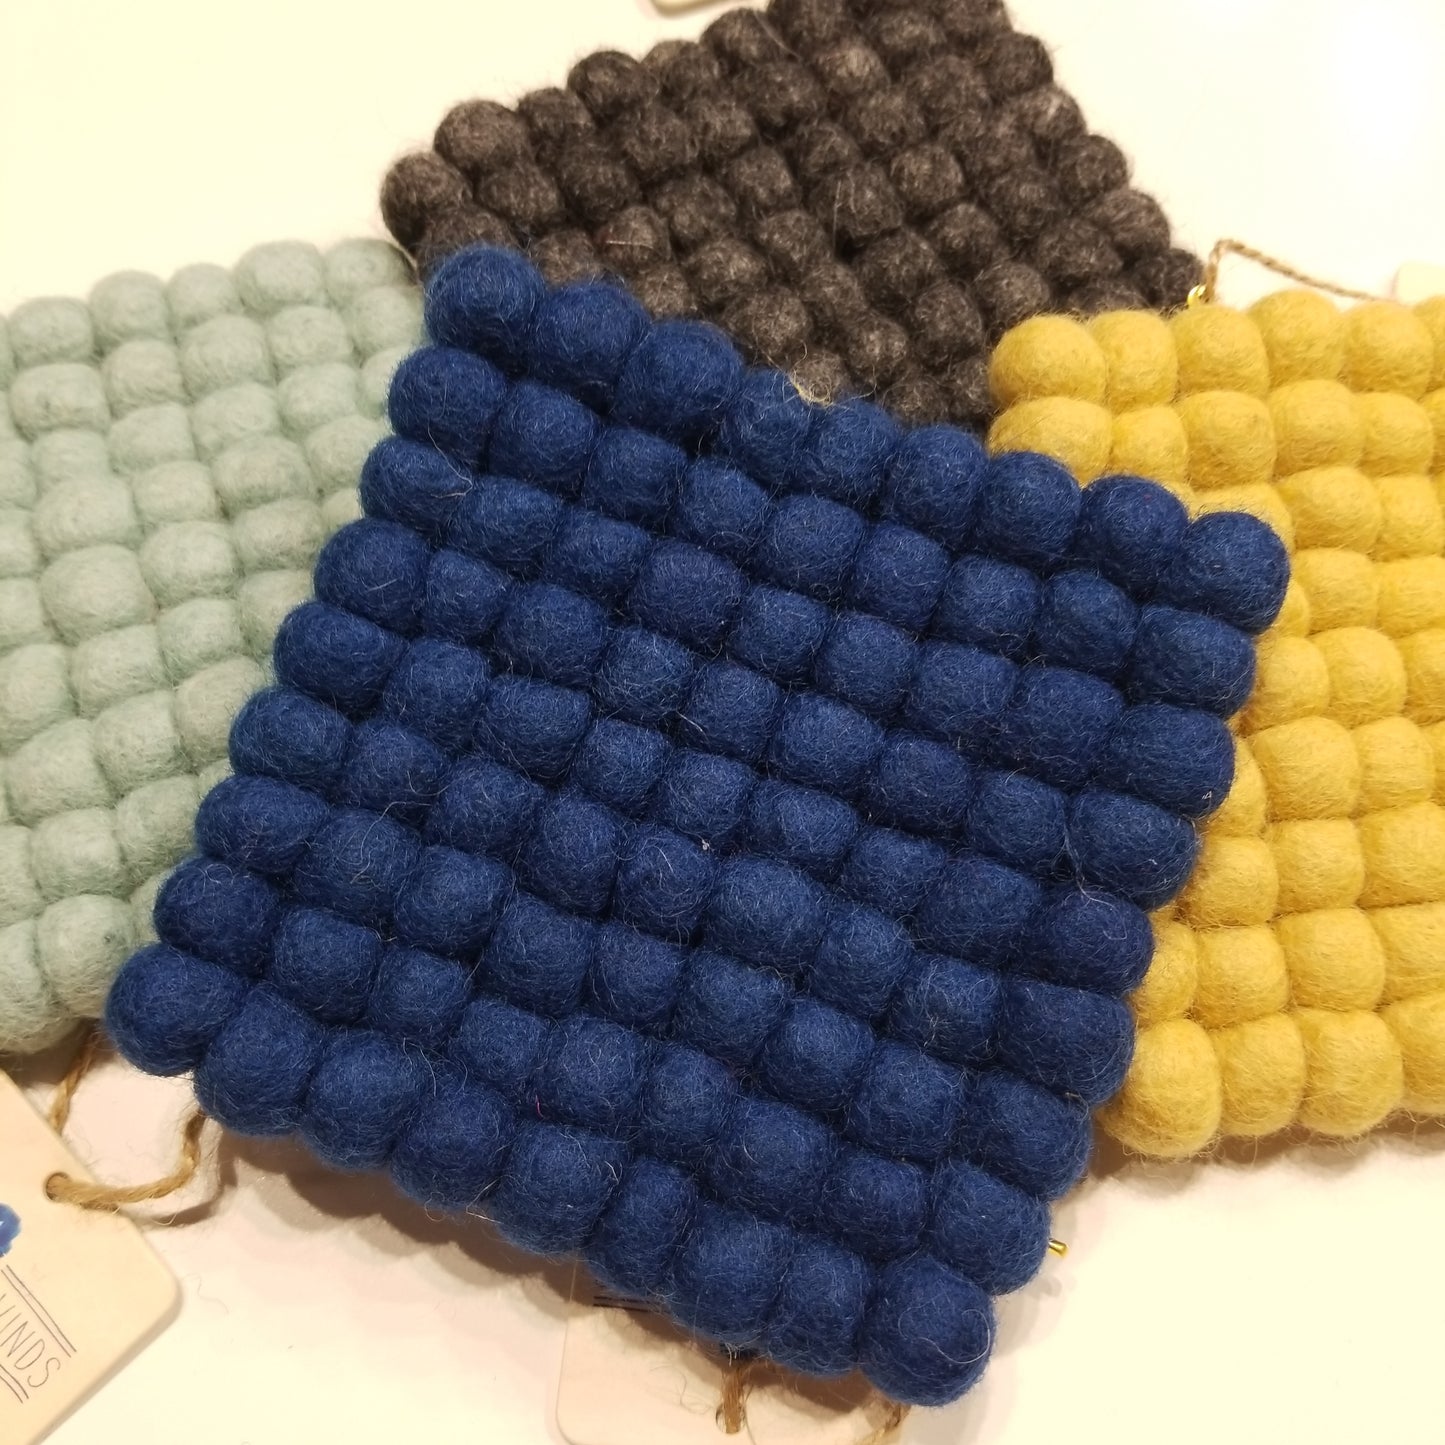 Felted Wool Coasters - Handmade 100% Wool - Lots of Choices!